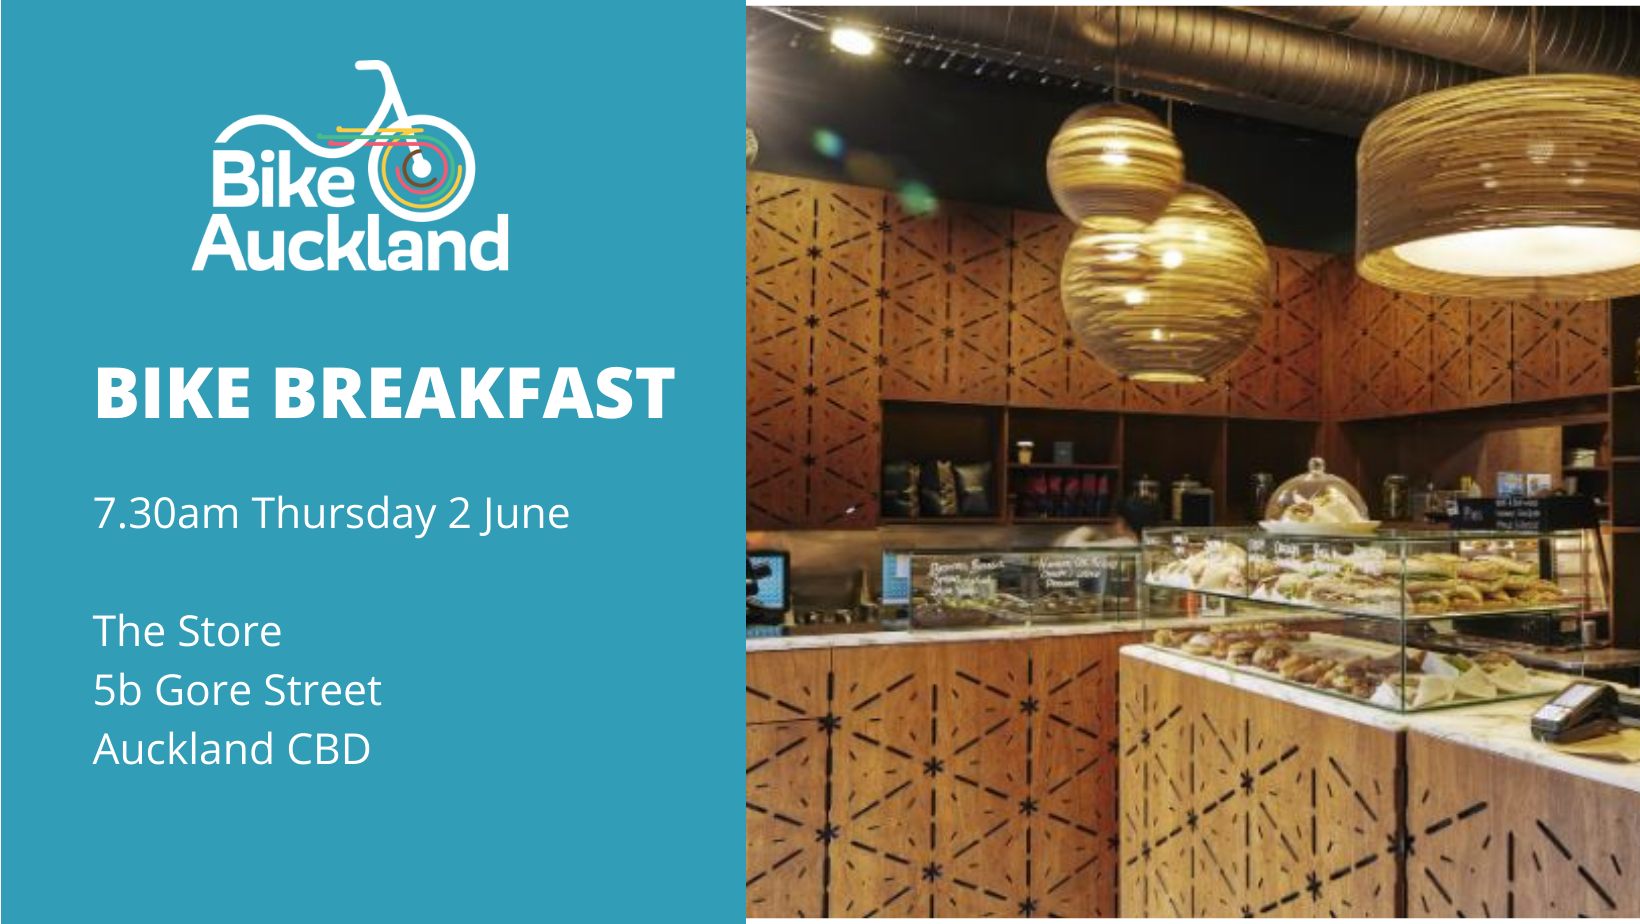 Image says Bike Breakfast, Thursday the 2nd of June, 7.30am at the Store.